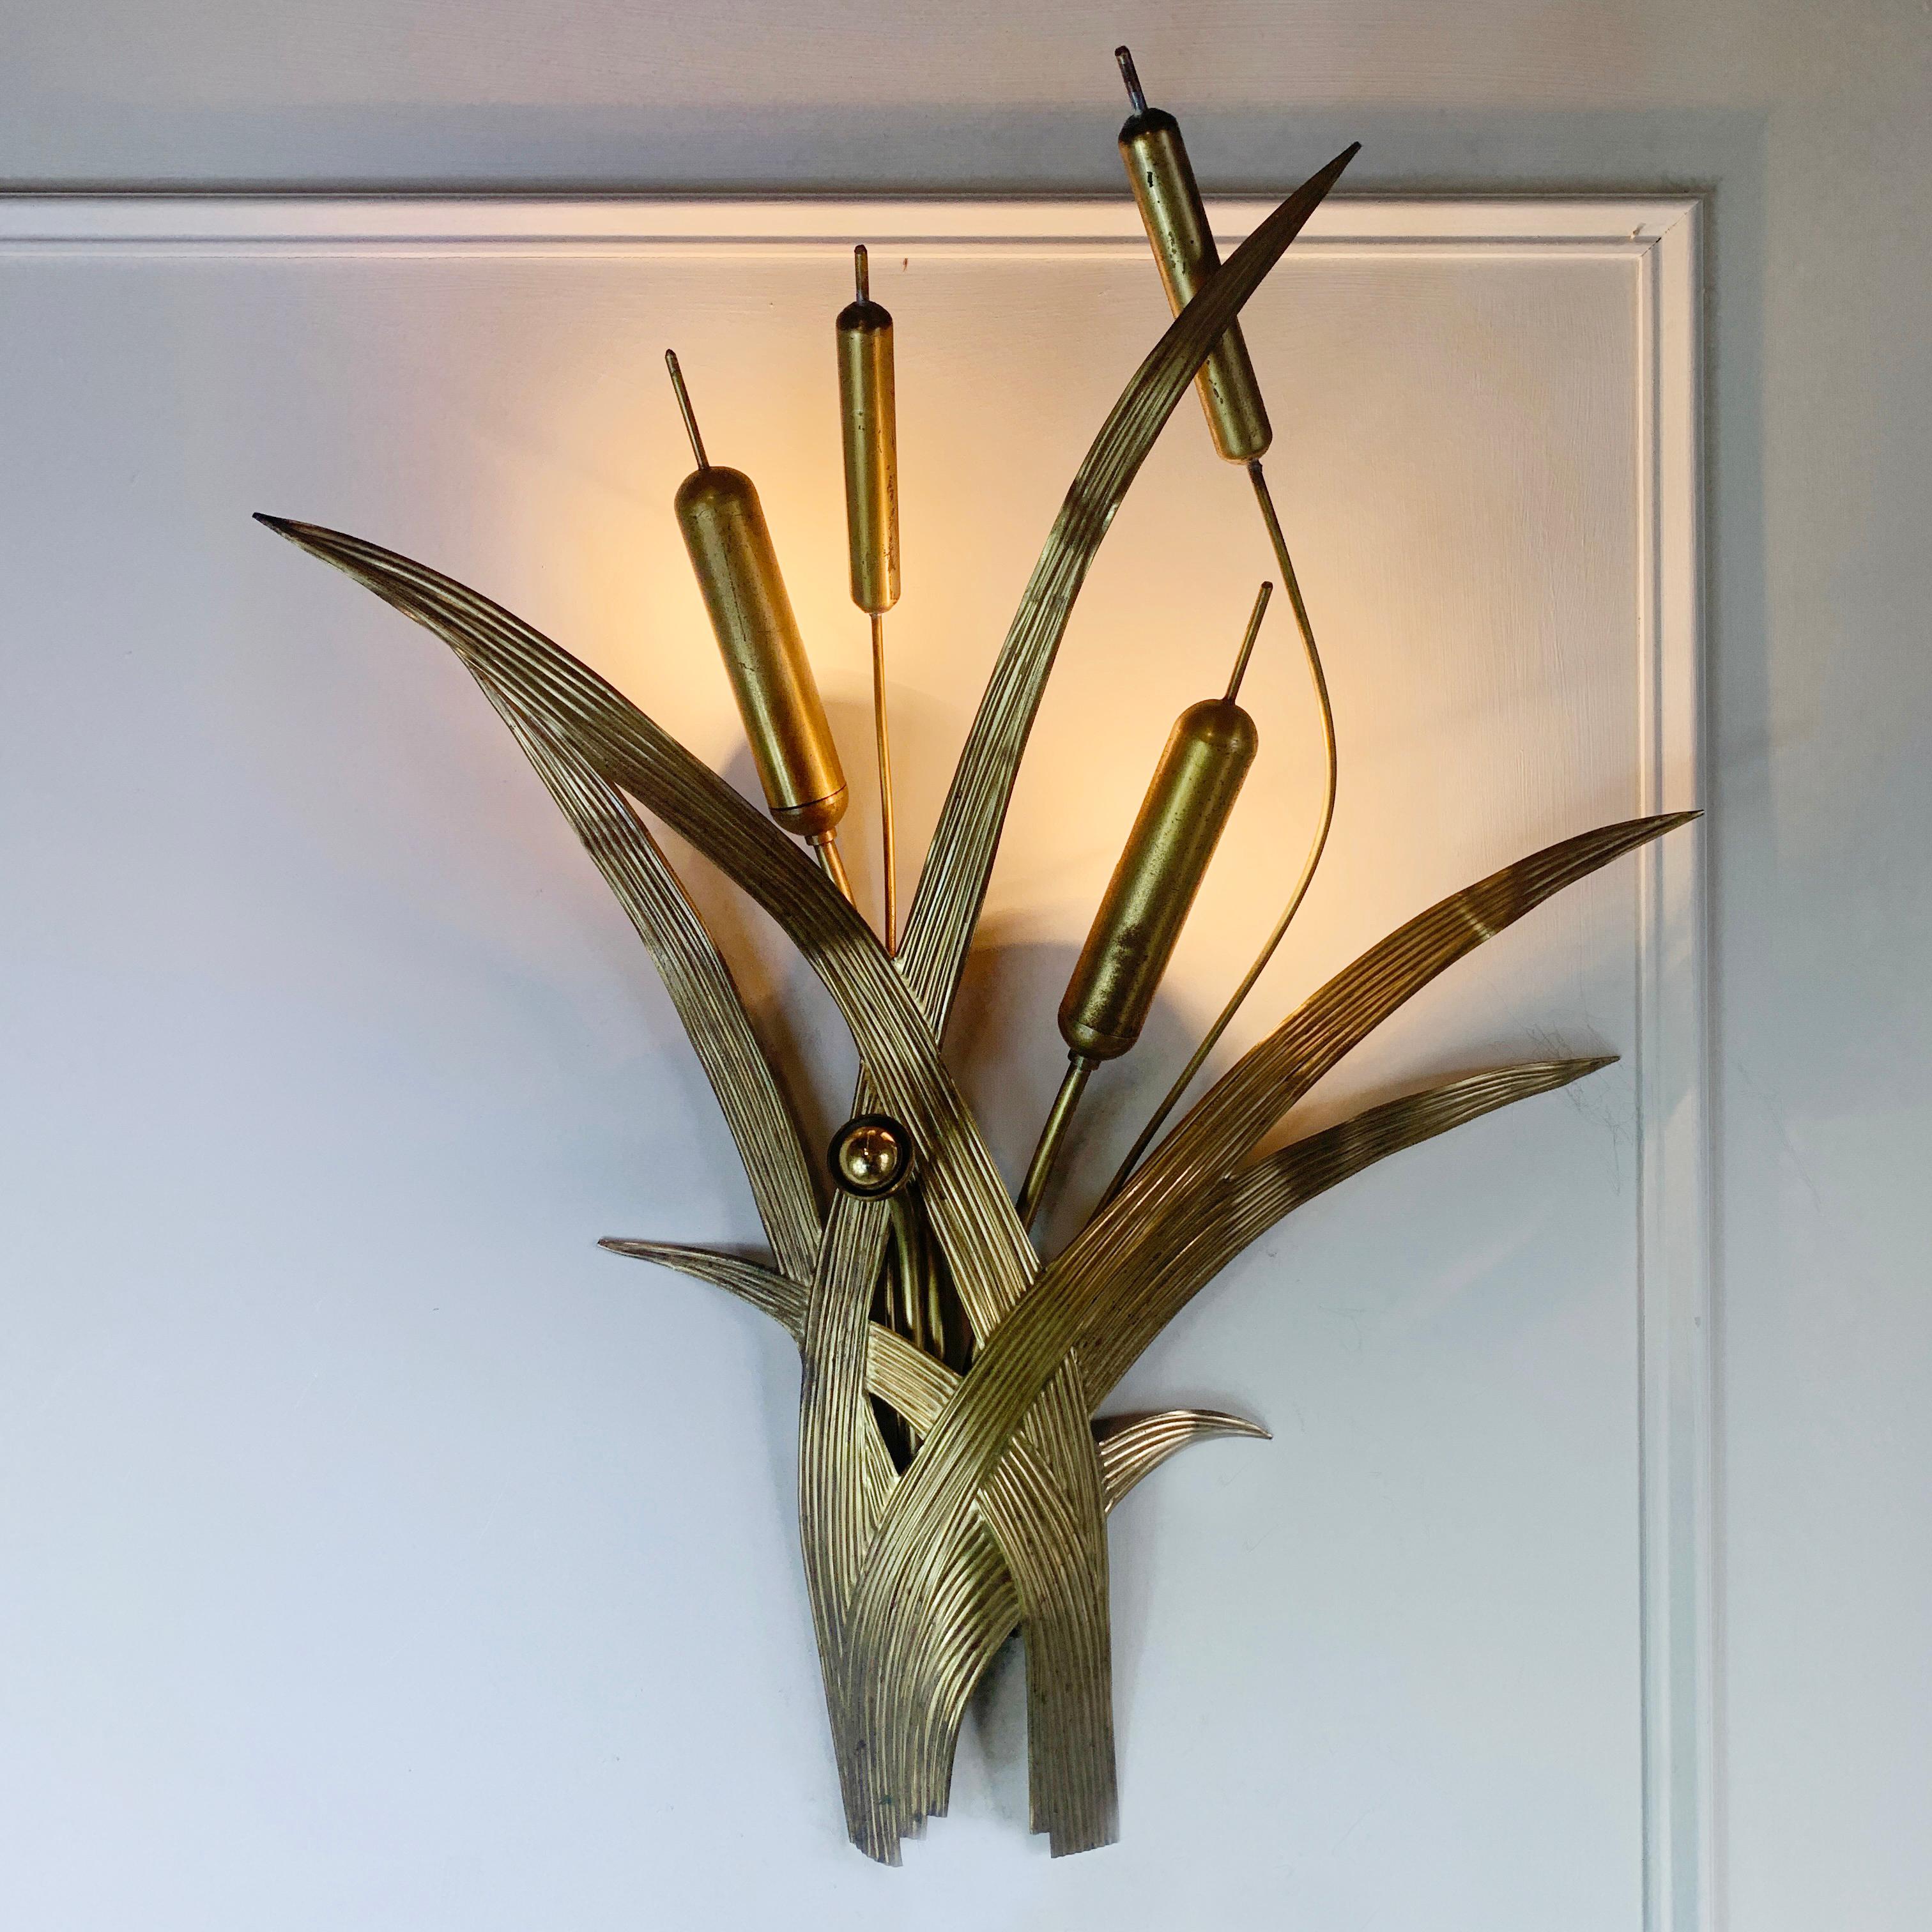 A 1970's Italian wall light, the formed broad brass textured leaves create the body of the light, with four bulrush stems to the top, inside two of the bulrush heads are the hidden bulb holders.

This is a beautifully designed light that gives a